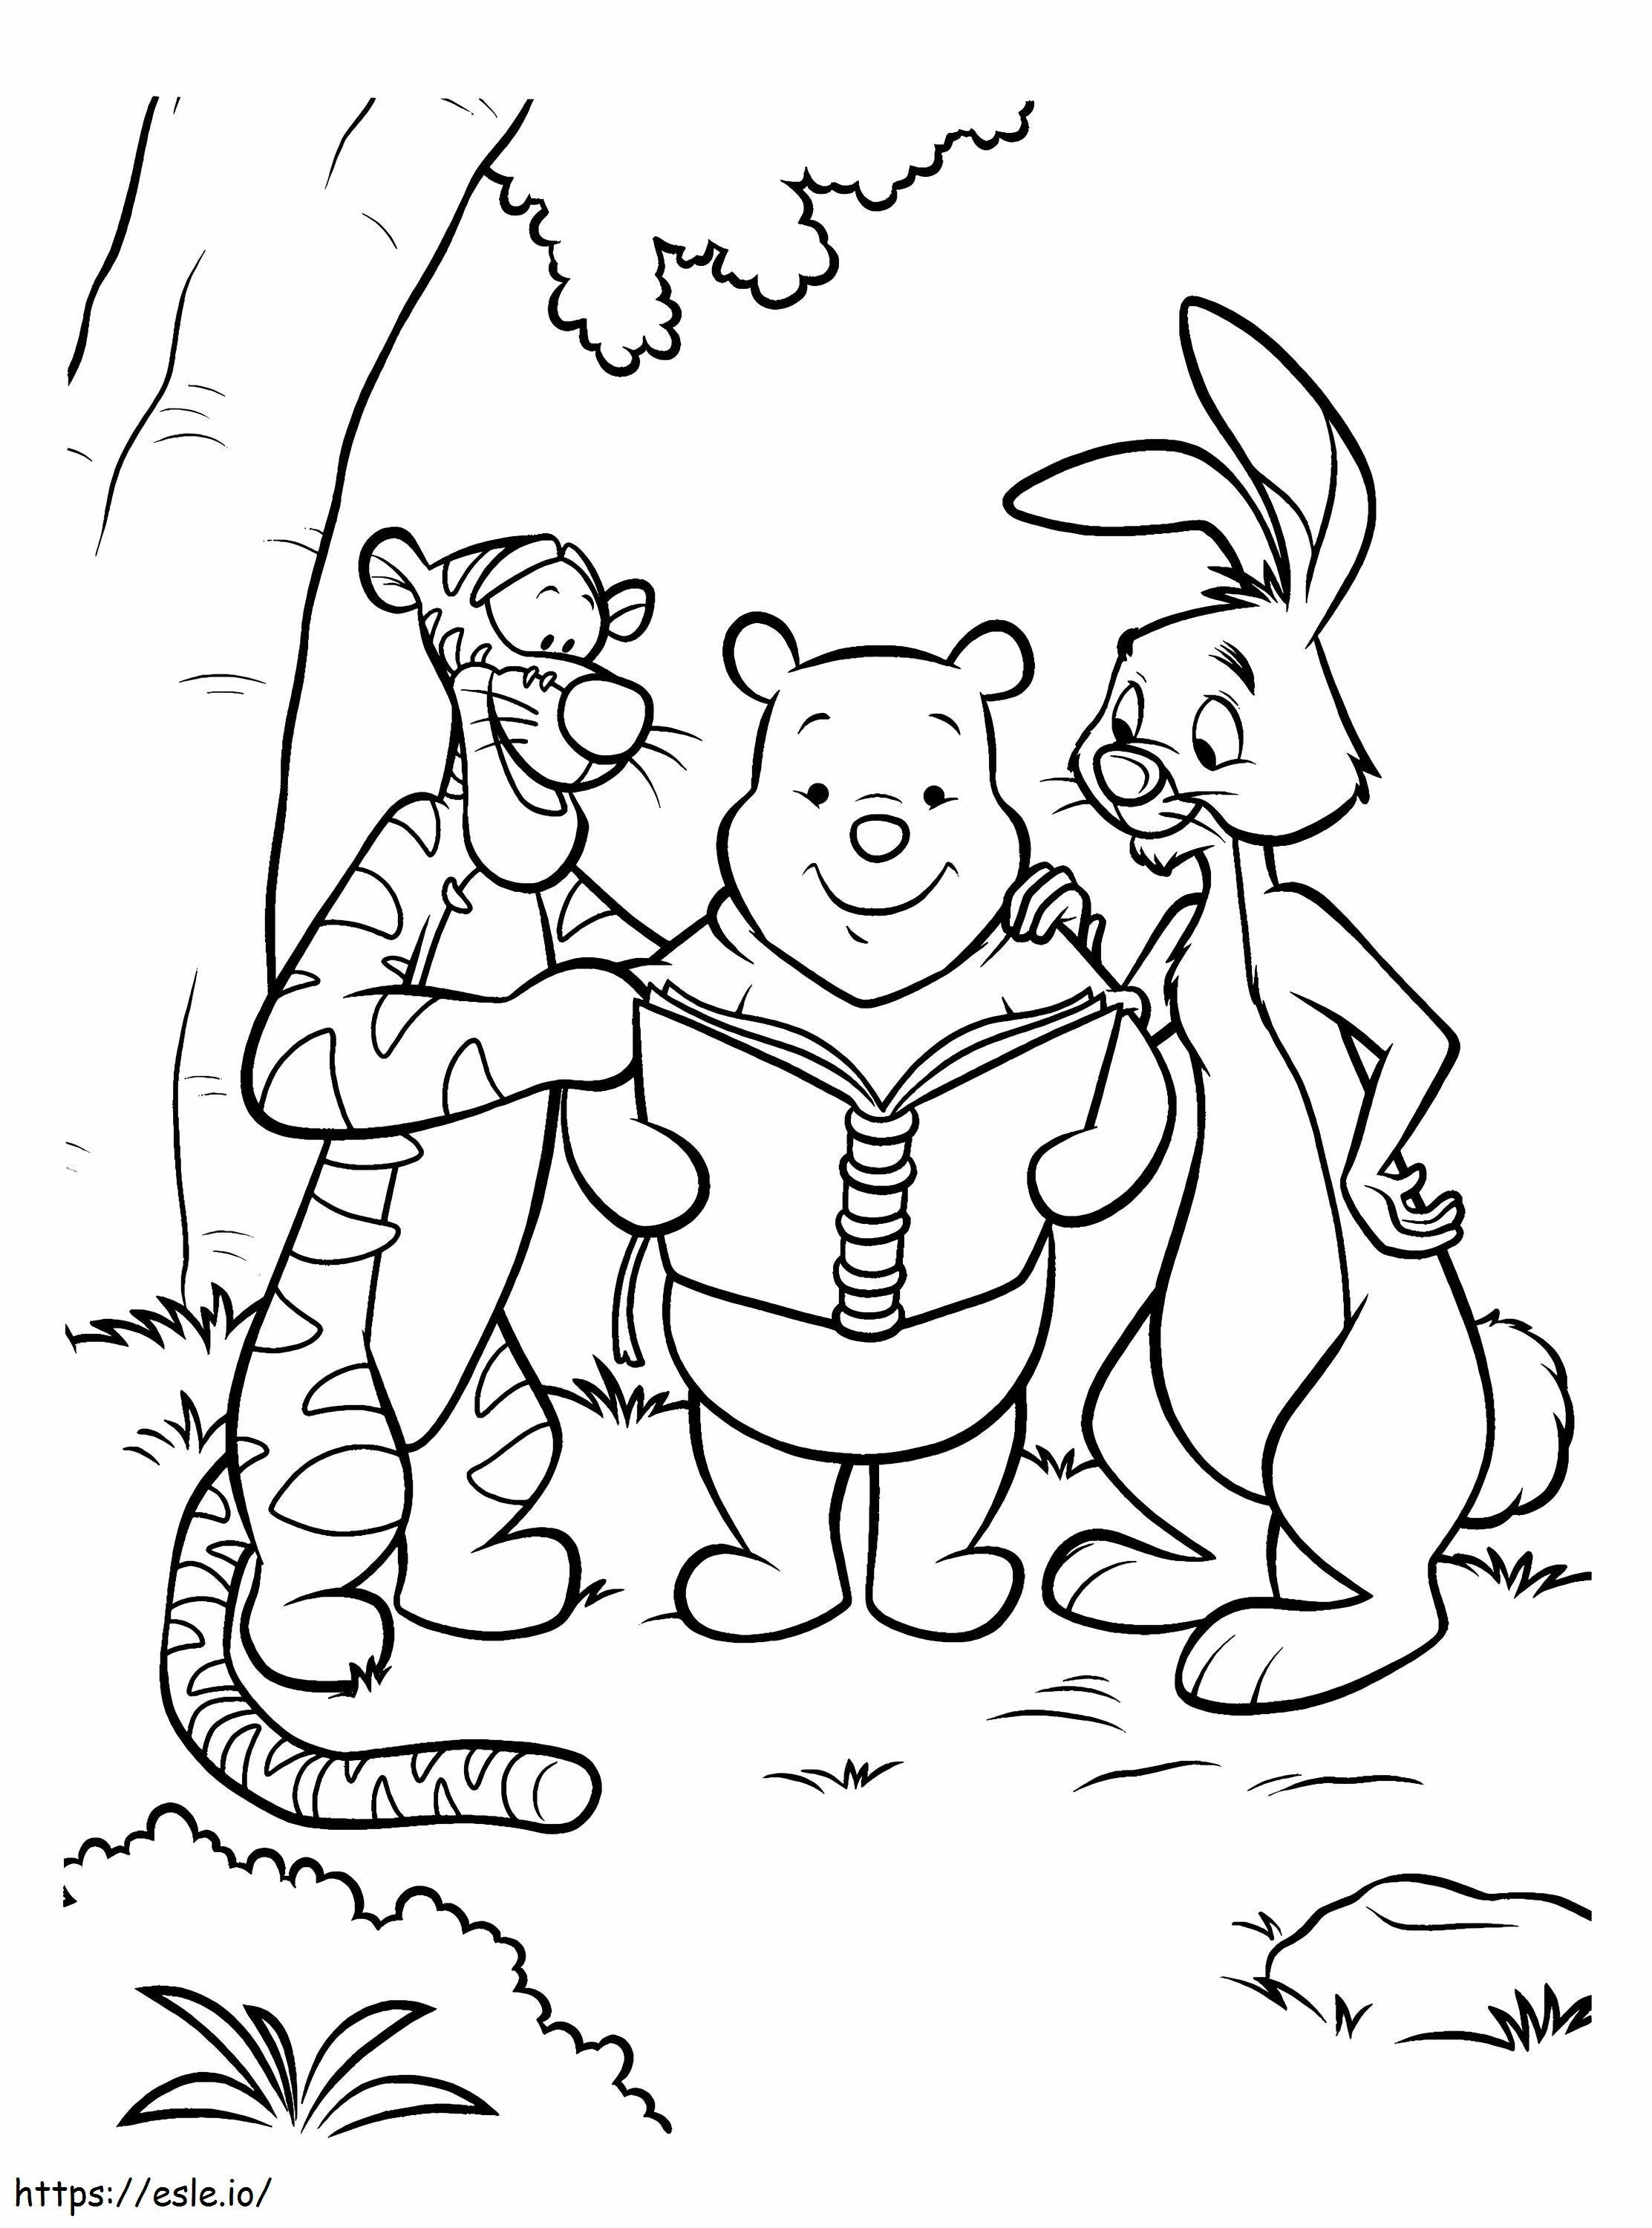 Reading And Friends Of Winnie De Pooh coloring page